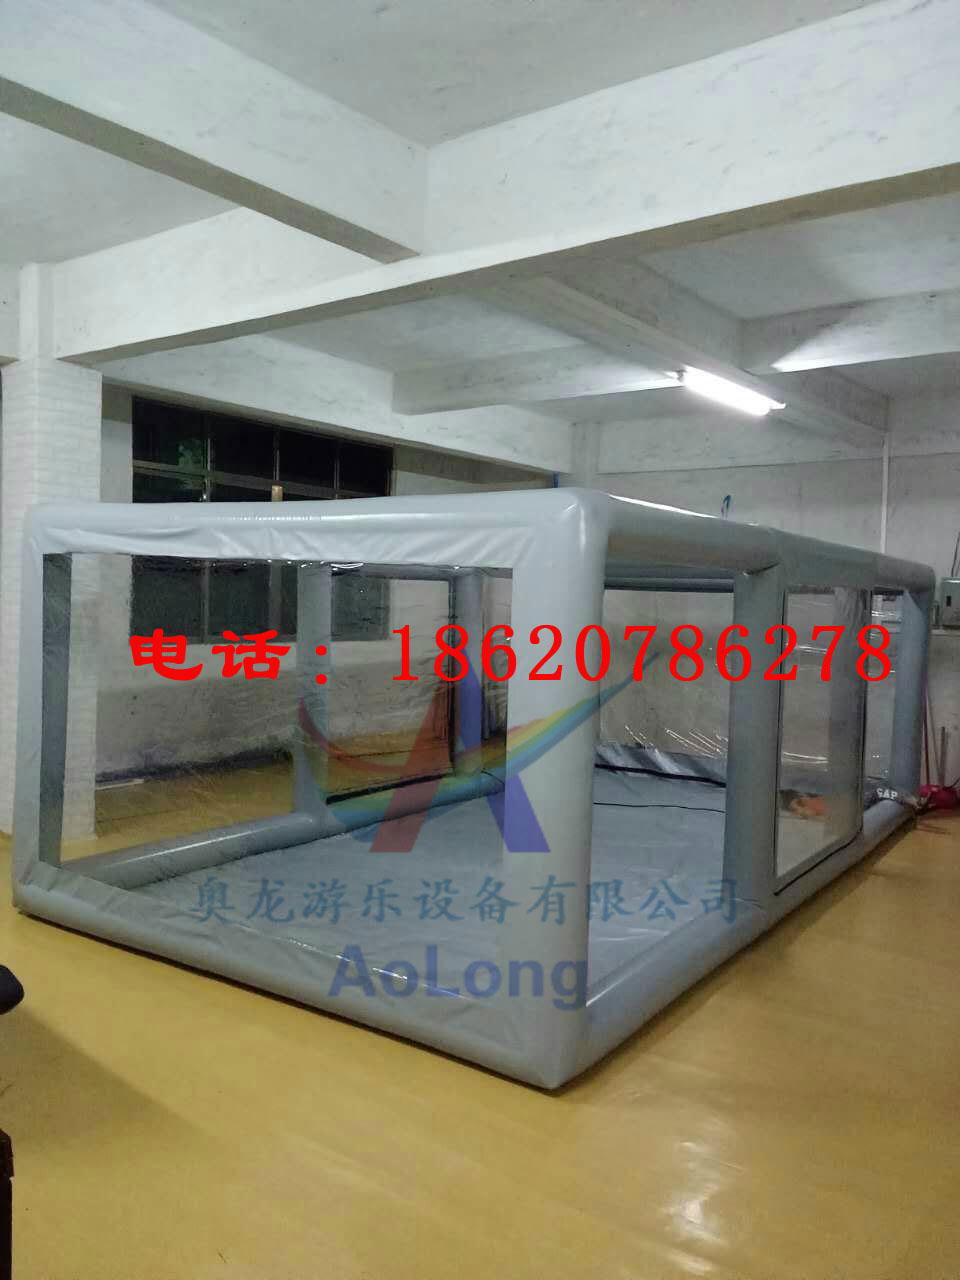 Inflatable car covers, transparent inflatable tent ，Advertising exhibition tent  5